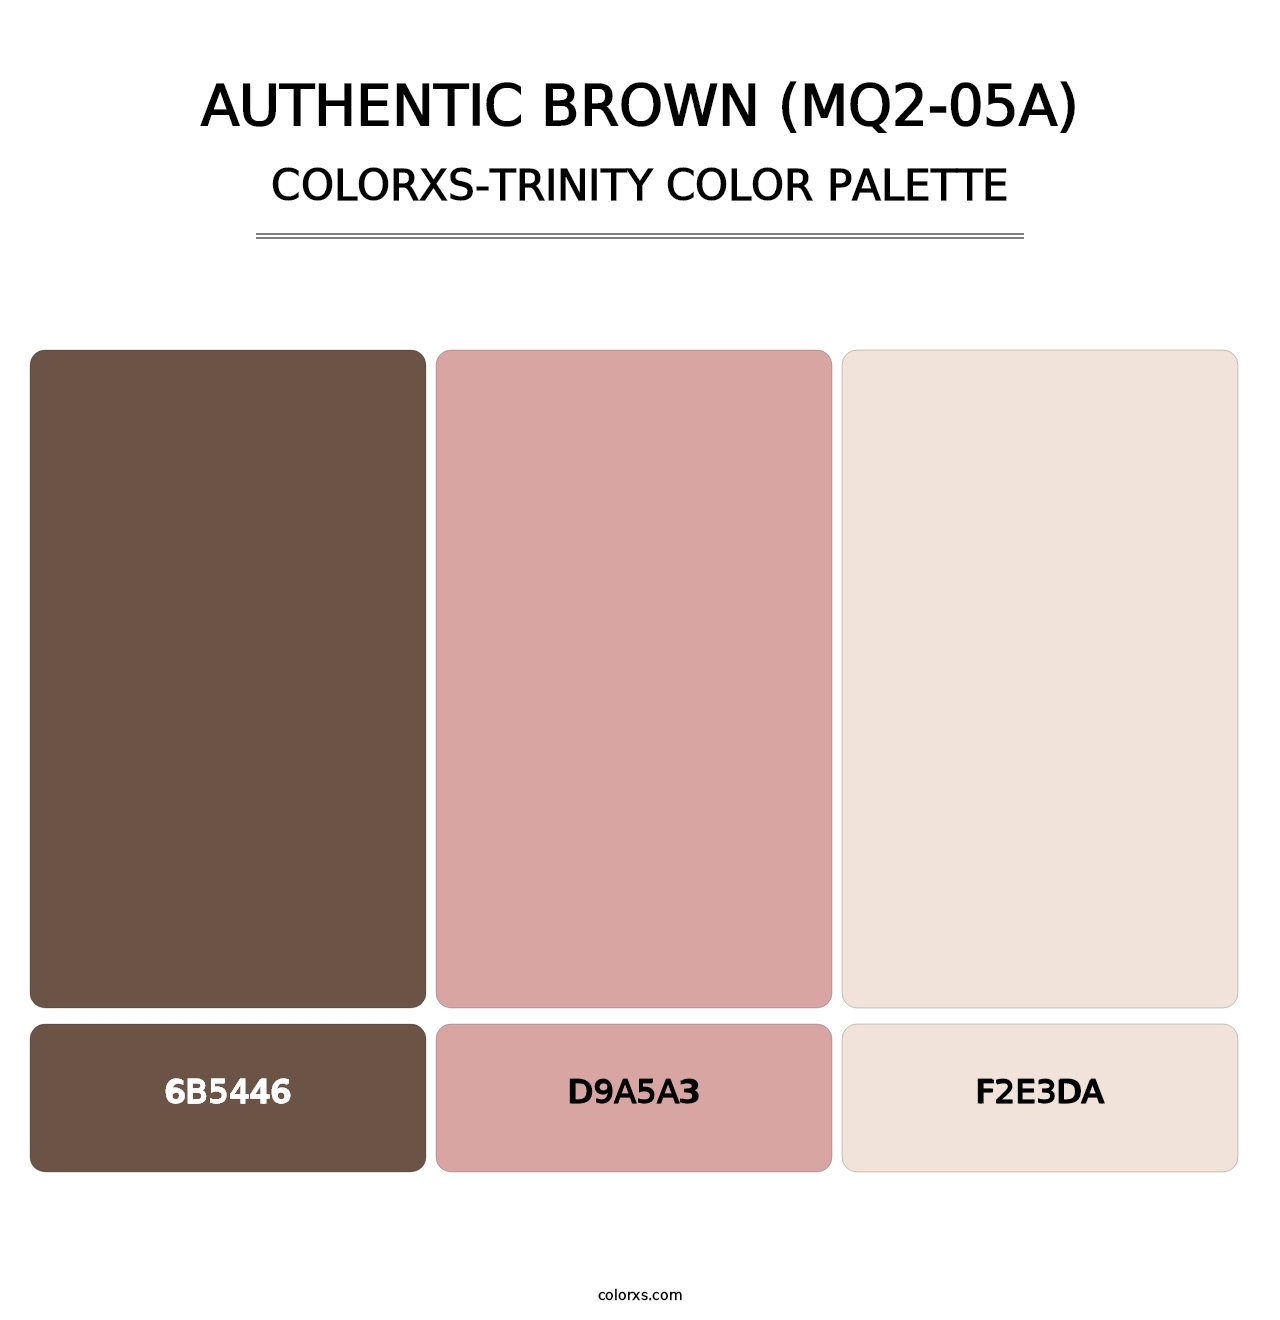 Authentic Brown (MQ2-05A) - Colorxs Trinity Palette